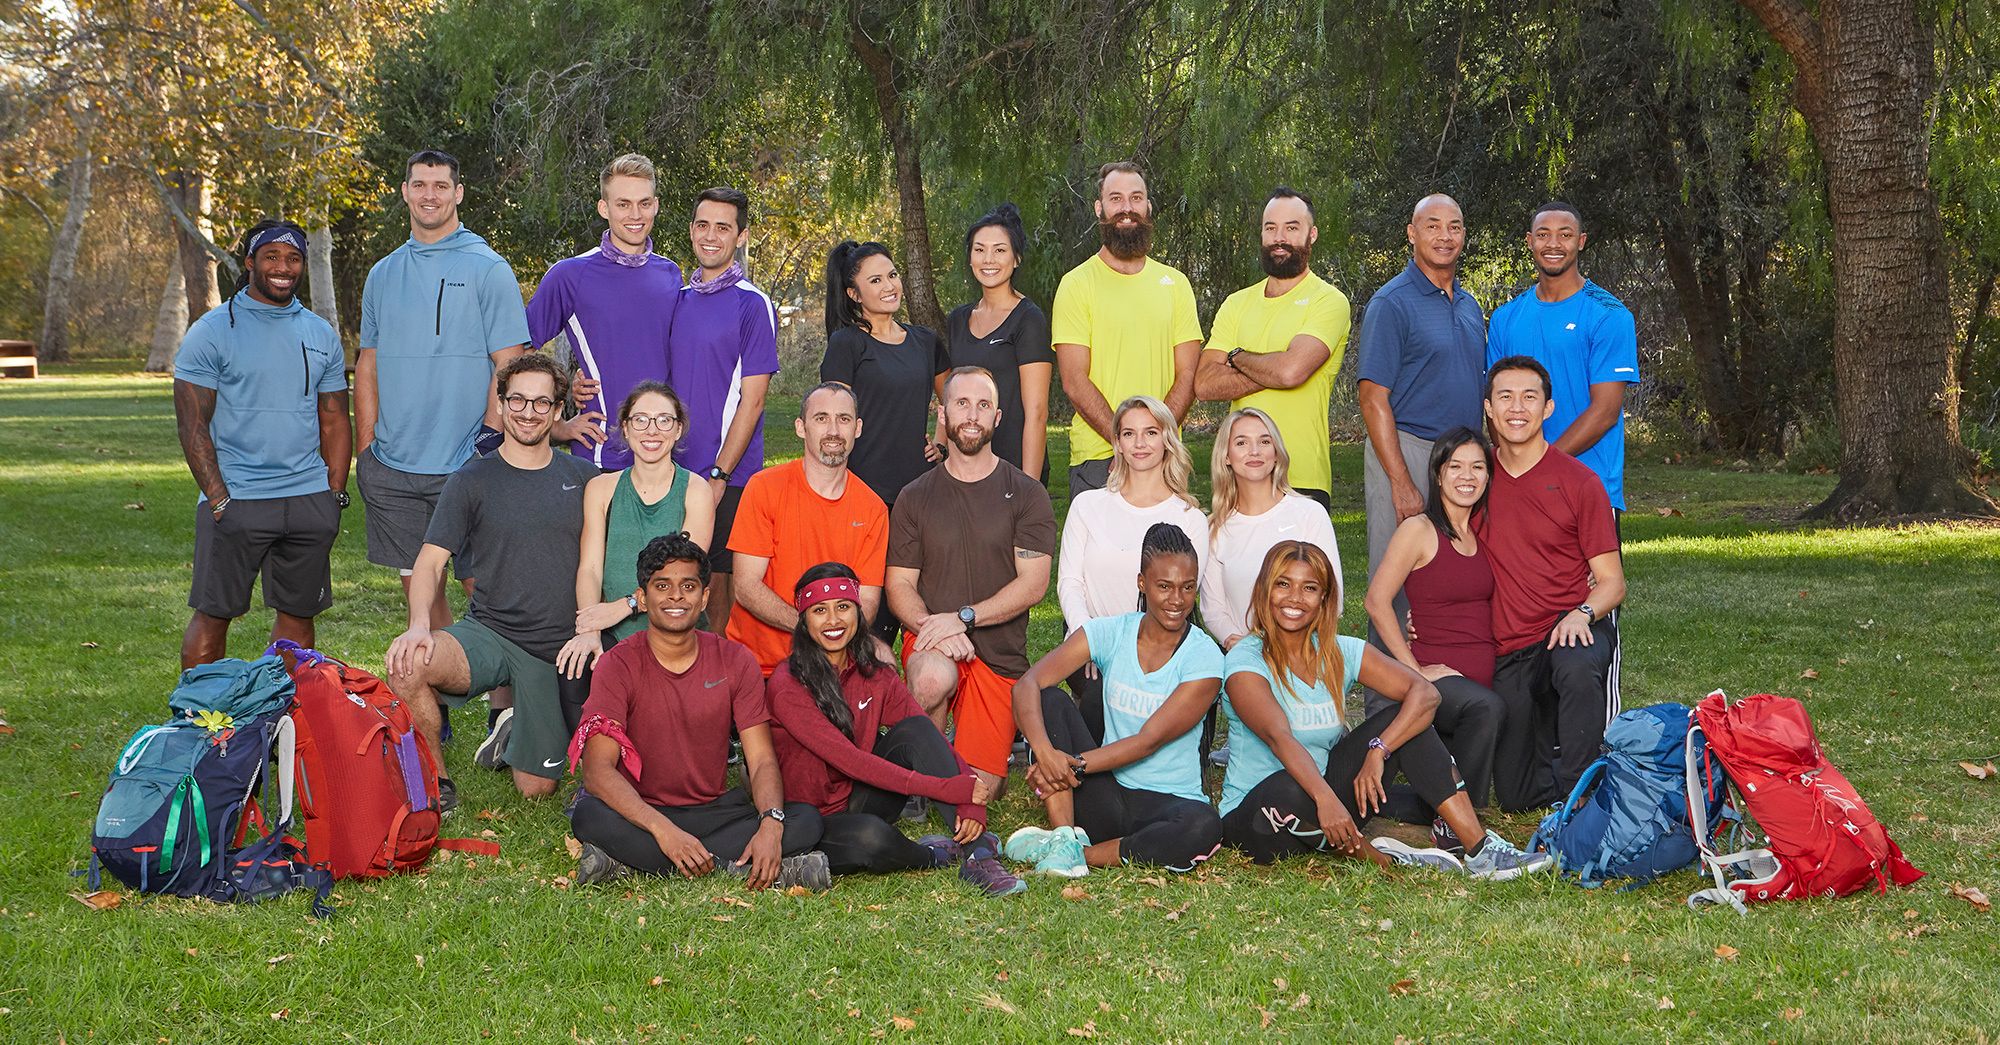 The 11 teams racing in Season 32 of The Amazing Race